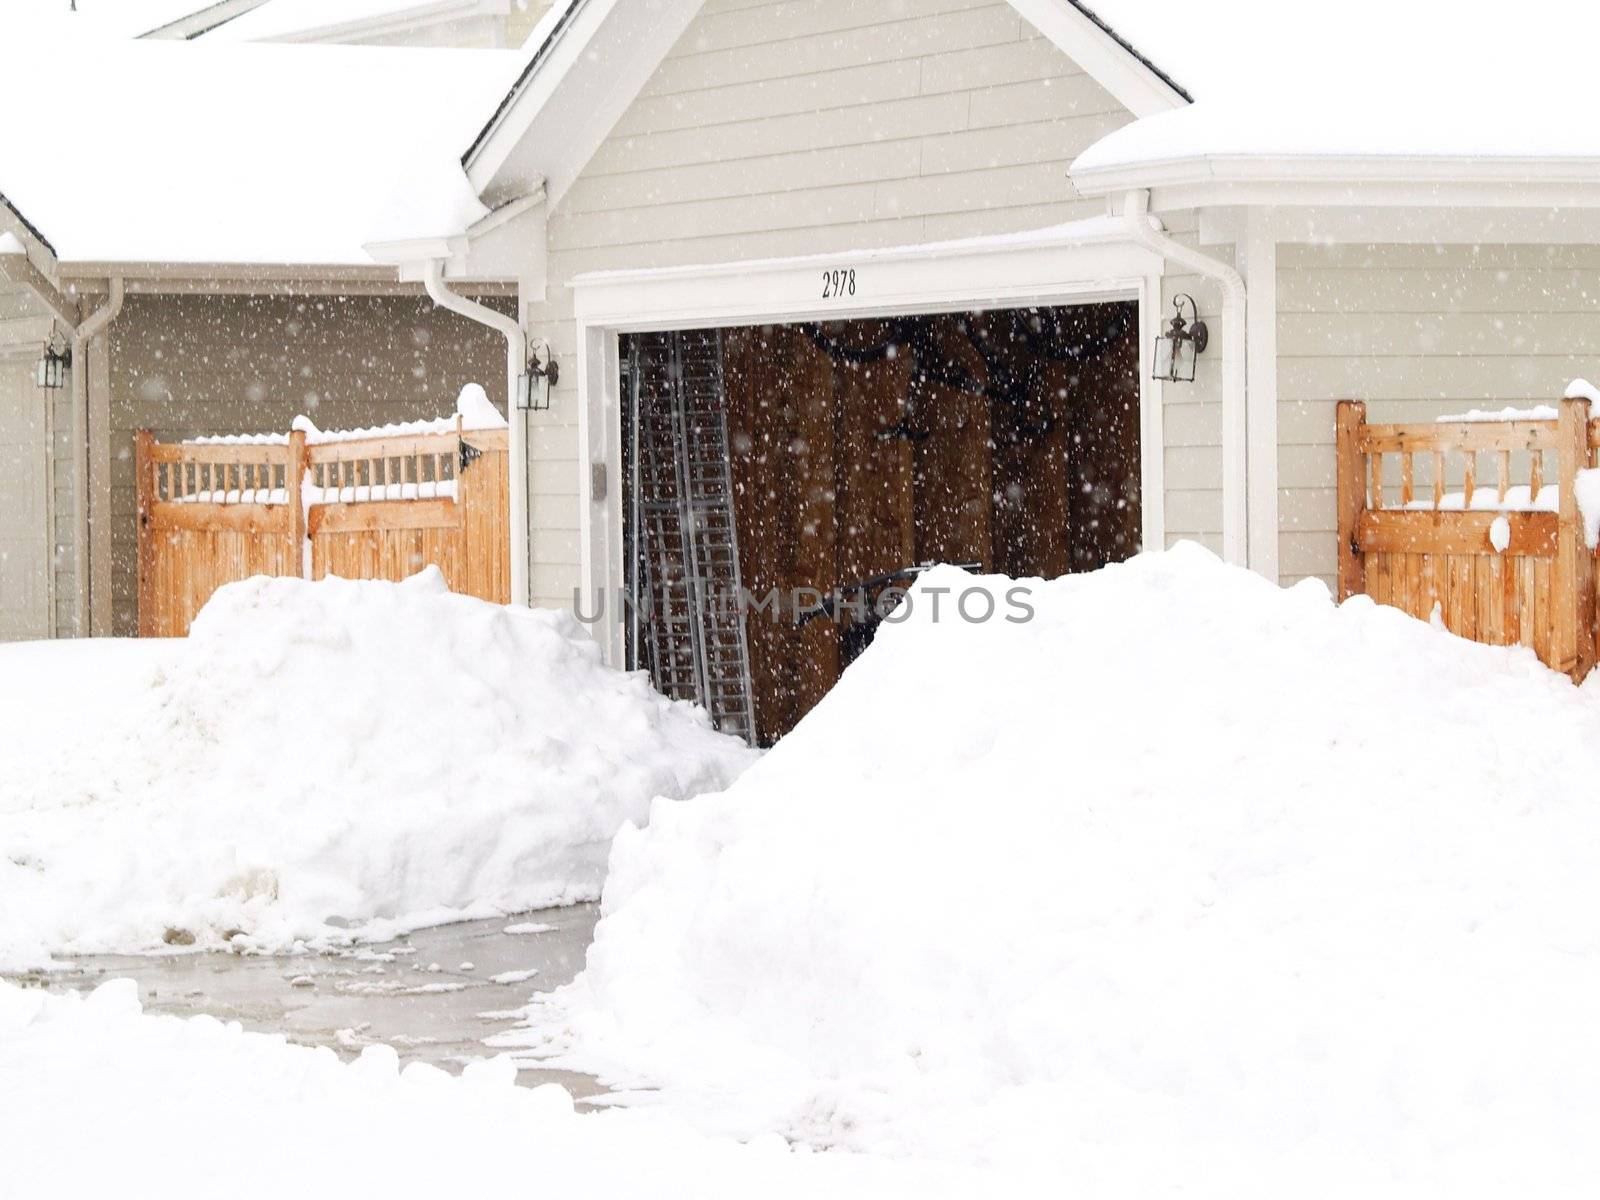 Garage in the snow by chaosmediamgt